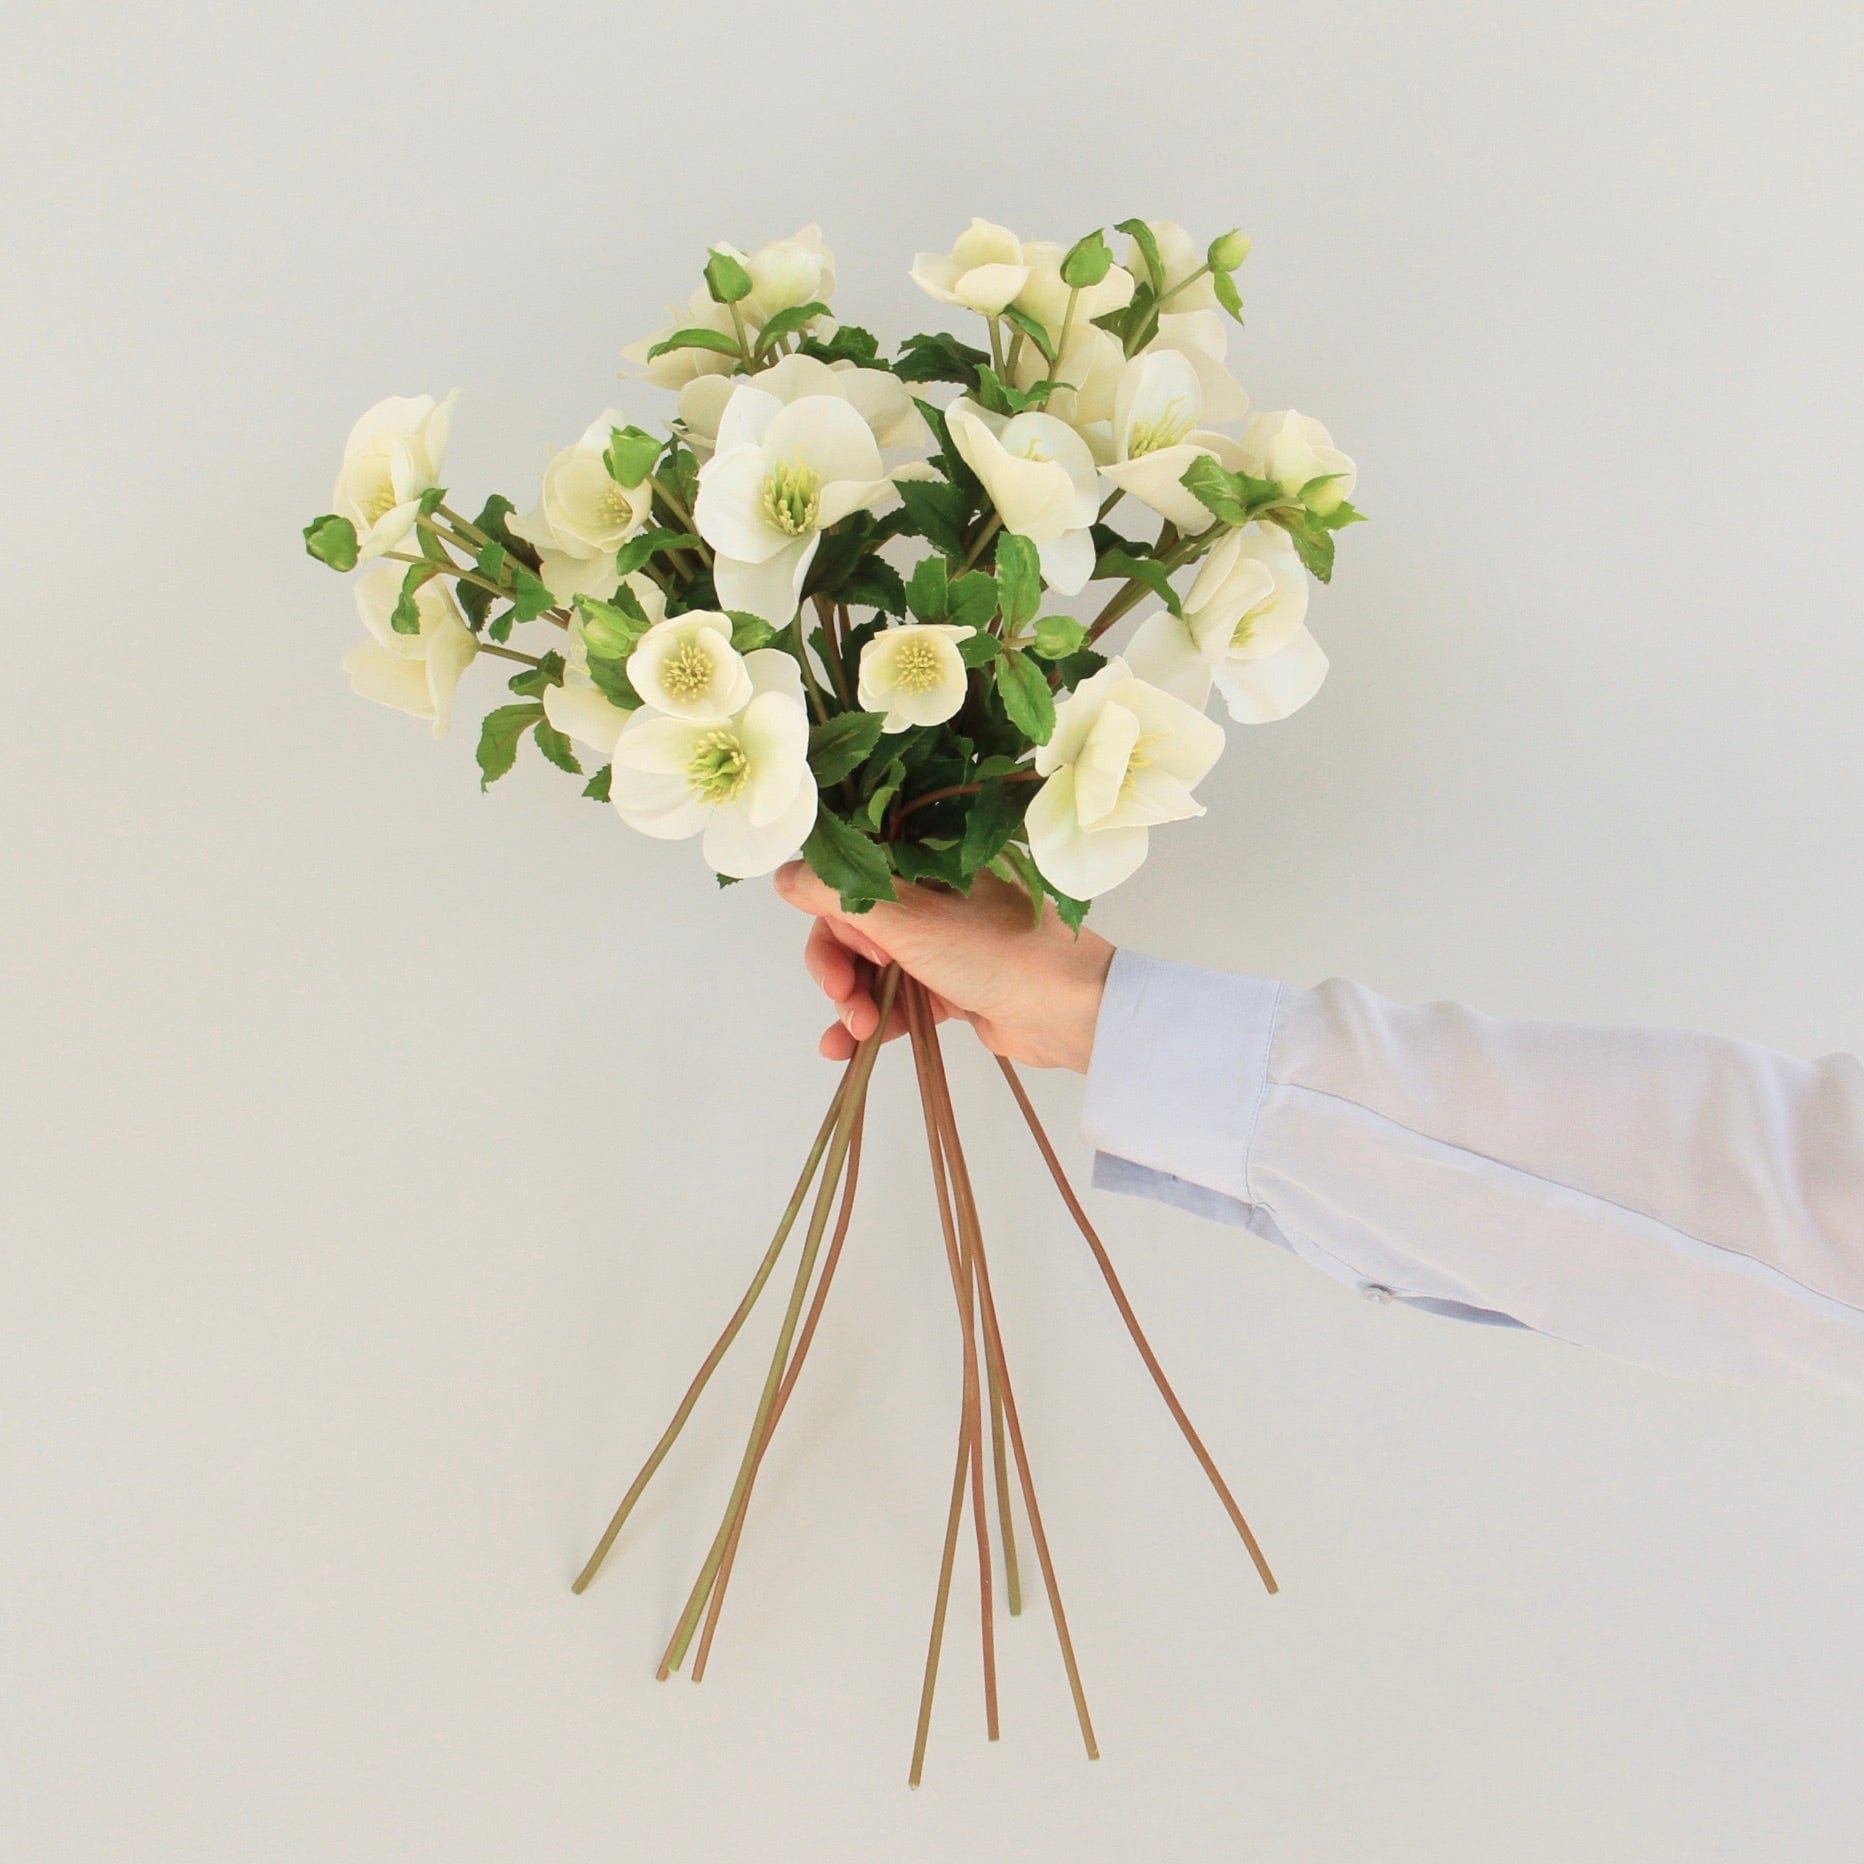 Artificial hellebore the finest white faux hellebore and also known as the artificial Christmas rose, luxury silk flowers realistic faux flowers from Amaranthine Blooms UK